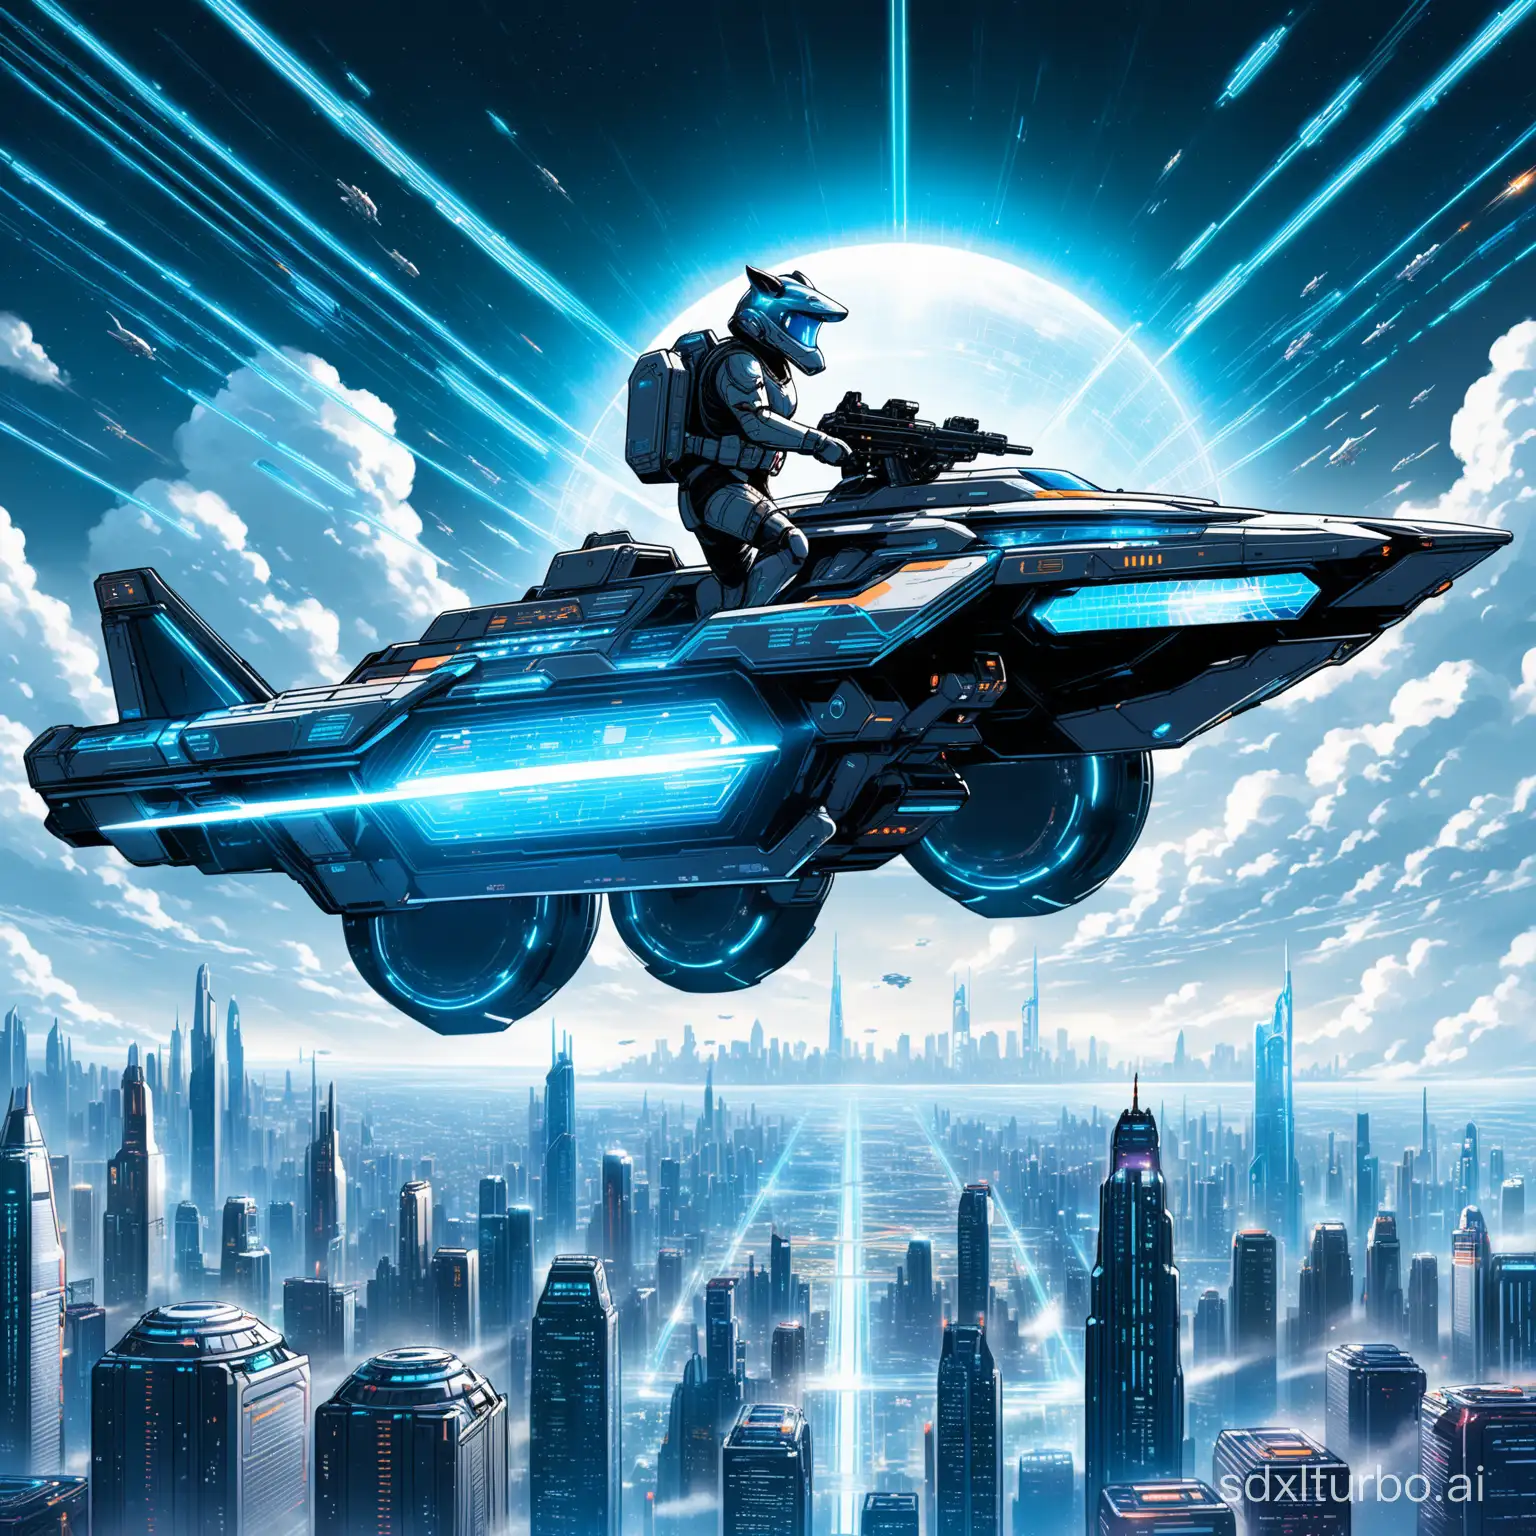 "Create a detailed futuristic sci-fi scene featuring a dog in high-tech armor flying above a city skyline. The dog is mounted on a uniquely designed high-speed vehicle, decorated with LED strips and dynamic energy patterns, with a plasma thruster at the rear emitting a dazzling blue flame. The armor is equipped with a mini-reactor and advanced defense systems, and the helmet's HUD displays real-time flight data and environmental scans. The dog holds a futuristic laser rifle, ready for any potential threats. The background showcases a city skyline filled with futuristic technology, where skyscrapers with glass facades reflect the light from the sky, and air traffic is bustling with various vehicles zipping through the clouds, some adorned with ad projections and holographic signage. The overall color scheme is dominated by cool tones, with vibrant colors used in certain details to highlight tech elements and dynamic effects."